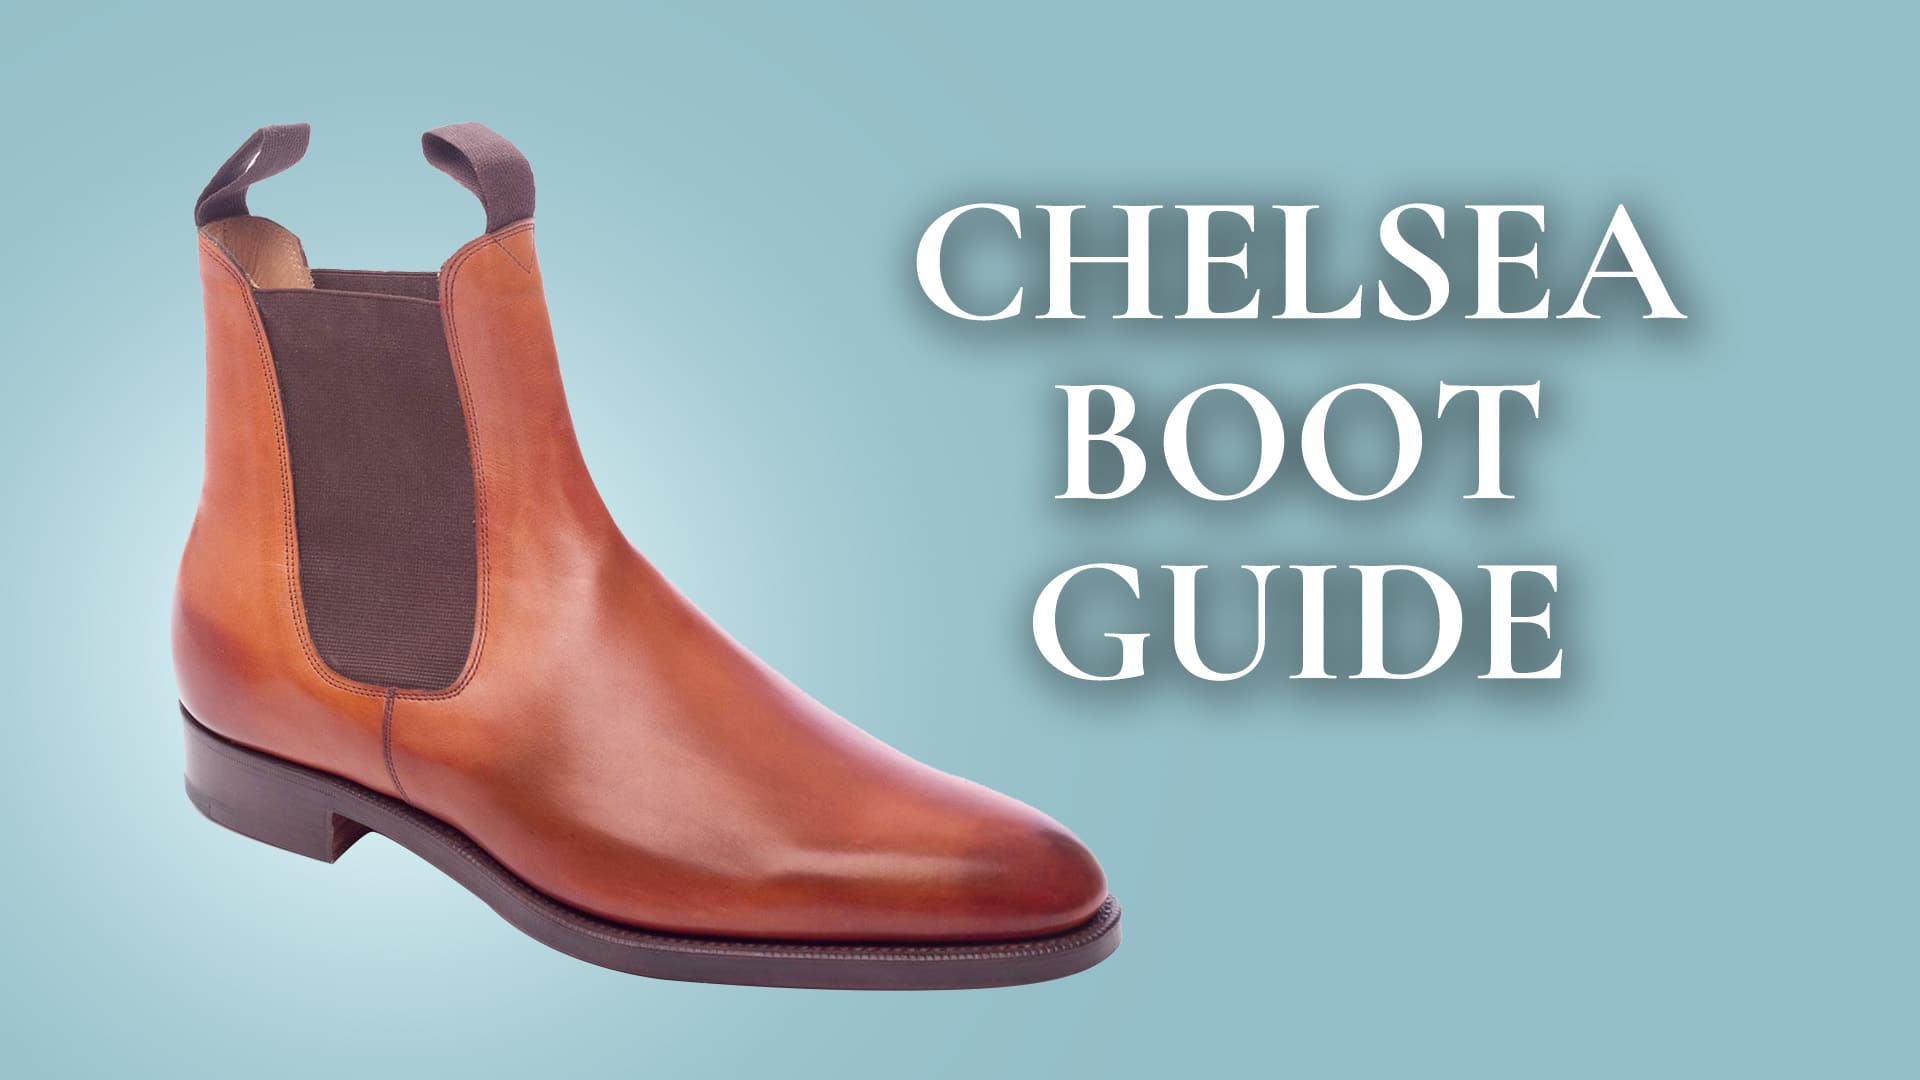 pistol Forfatning deltager The Chelsea Boots Guide - A Staple Boot For Gentlemen